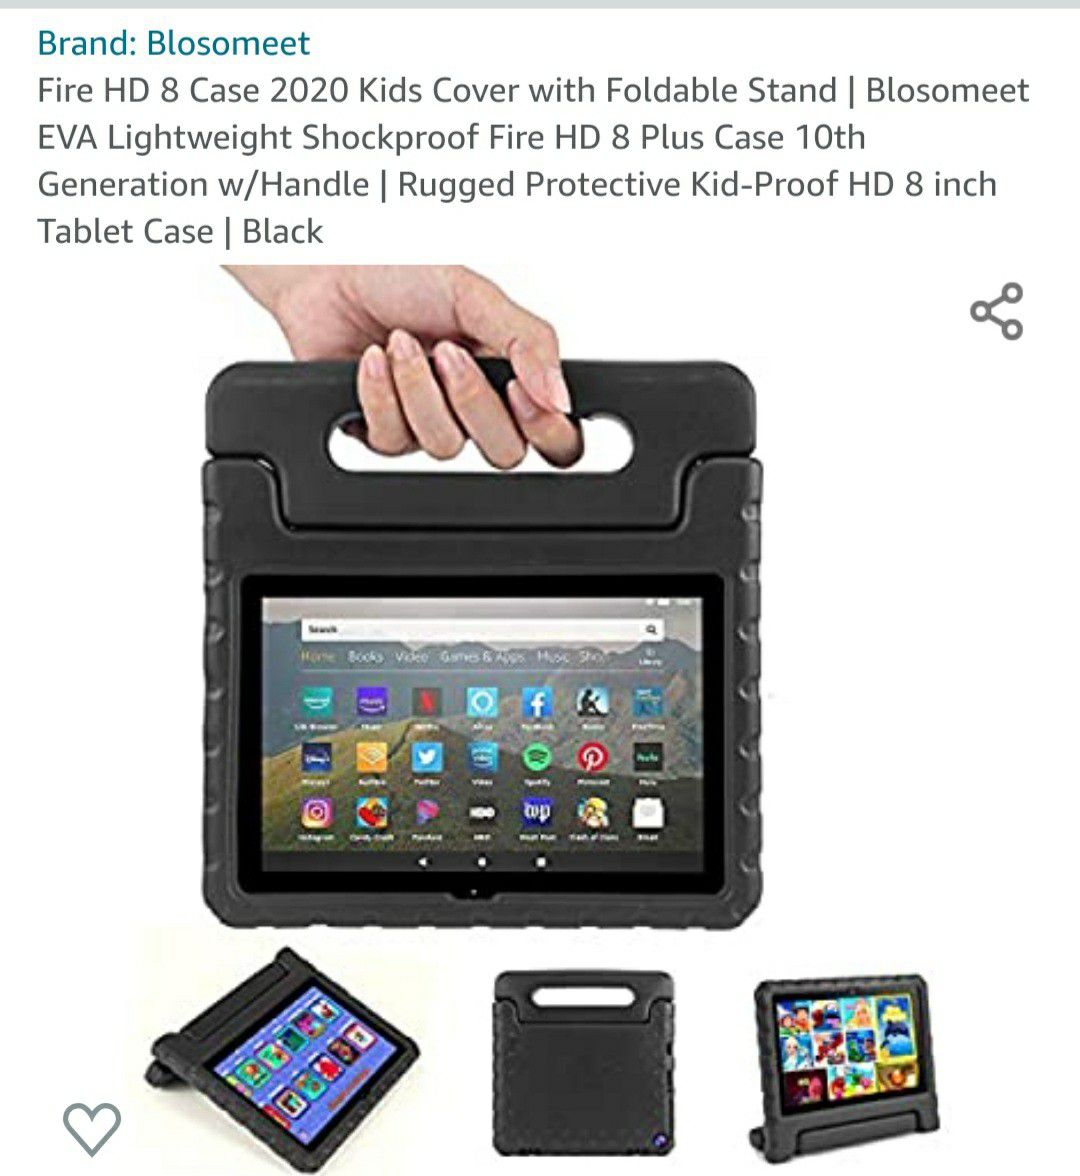 AMAZON HD FIRE 8 TABLET CASE 10TH GENERATION